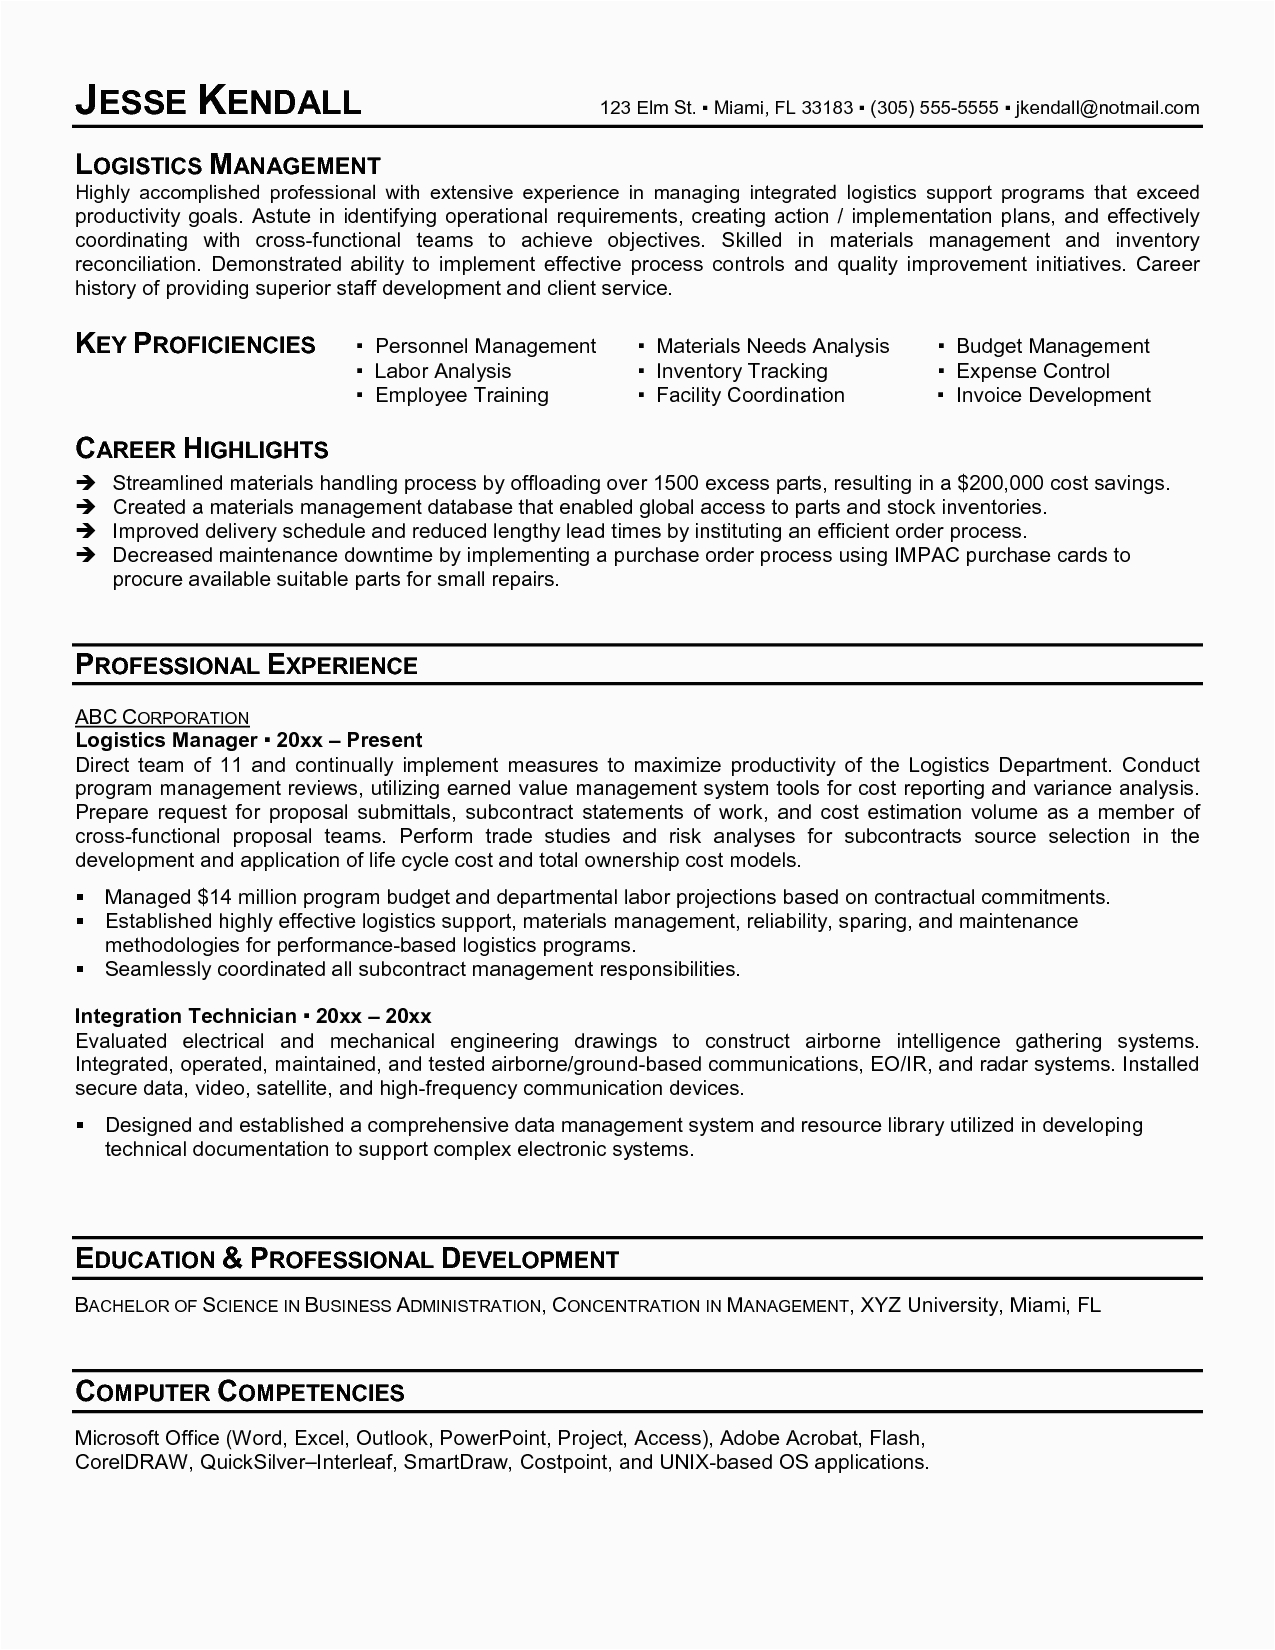 Sample Resume for Logistics Manager In India Logistics Manager Resume Example